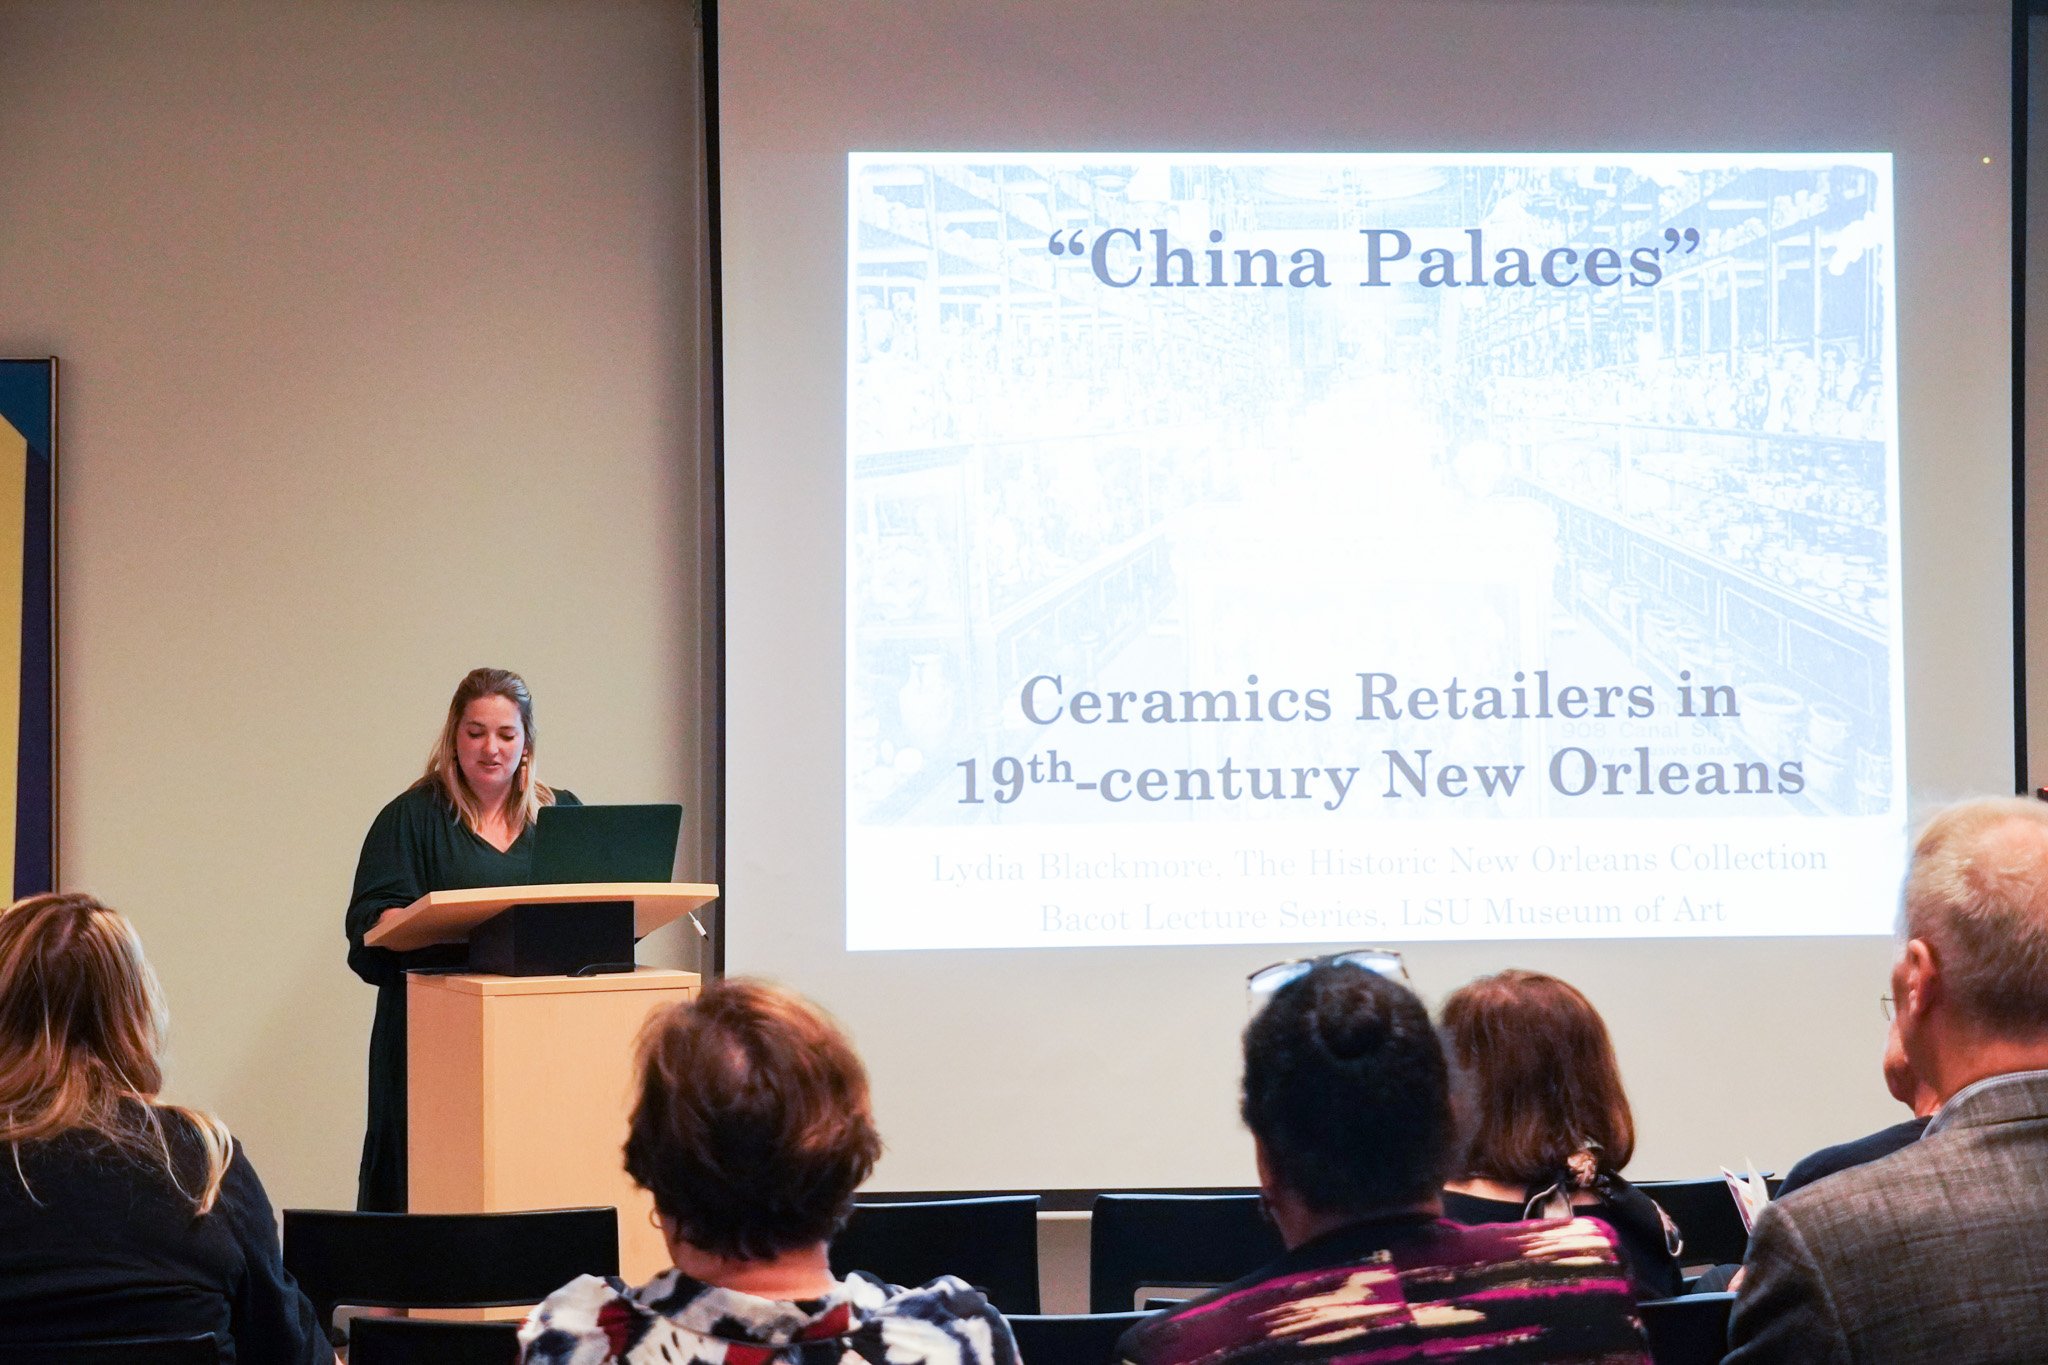 Lydia Blackmore, the Decorative Arts Curator at The Historic New Orleans Collection